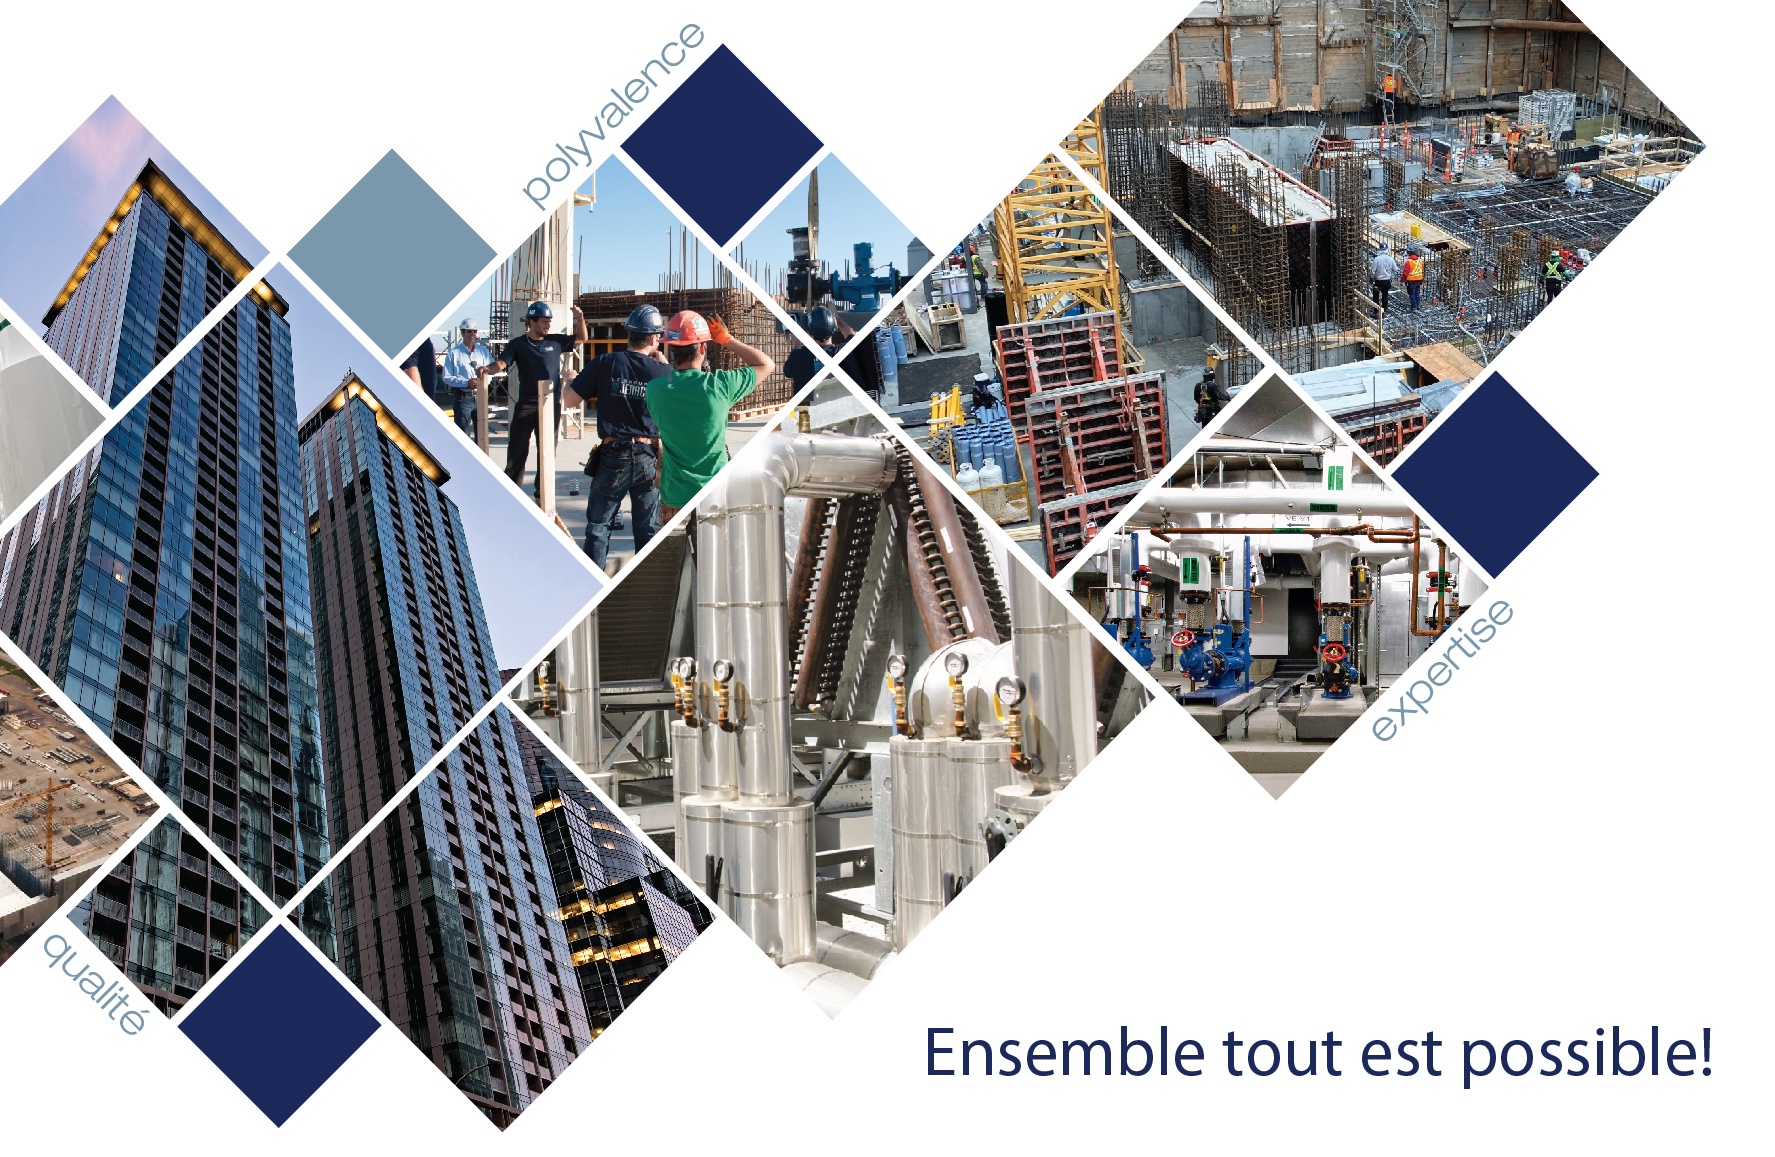 Le Groupe Jenaco: 5th Largest Piping Sector Employer in Québec